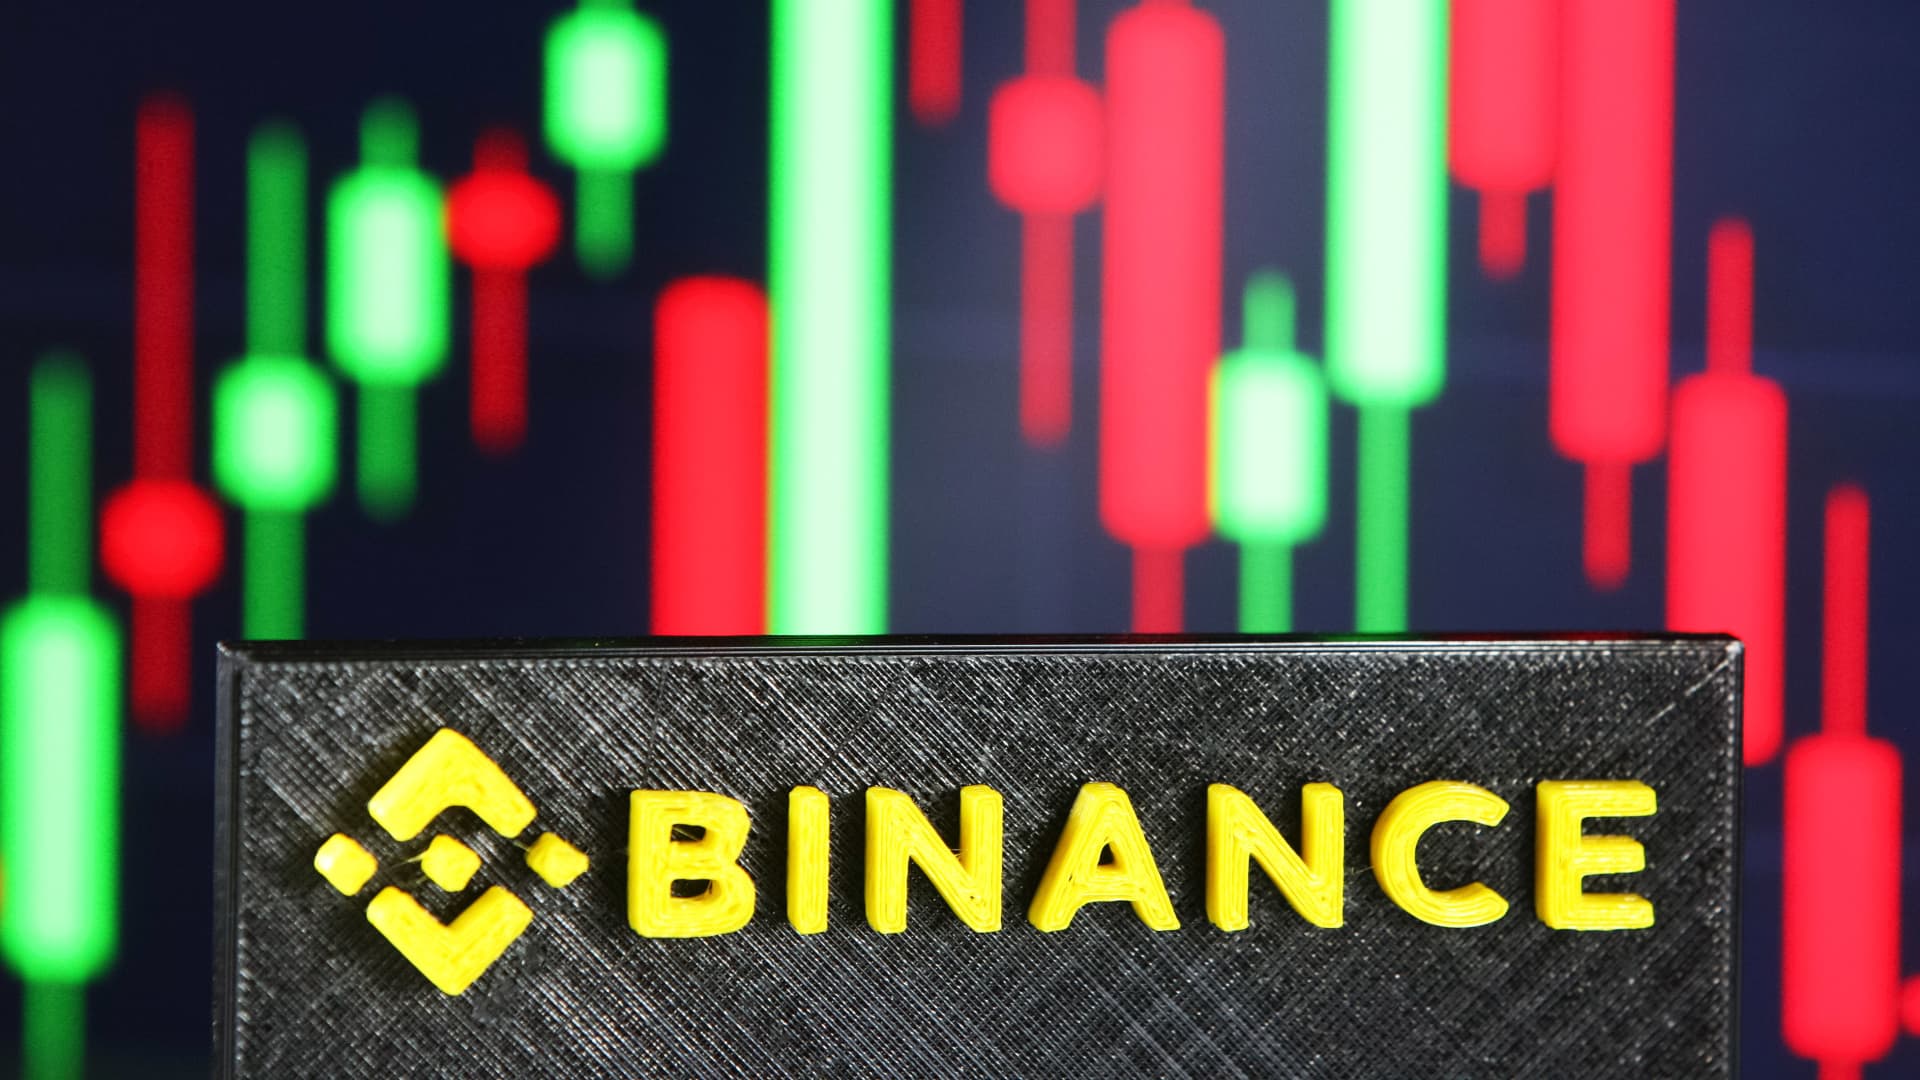 Binance was the final destination for millions in funds from Bitzlato